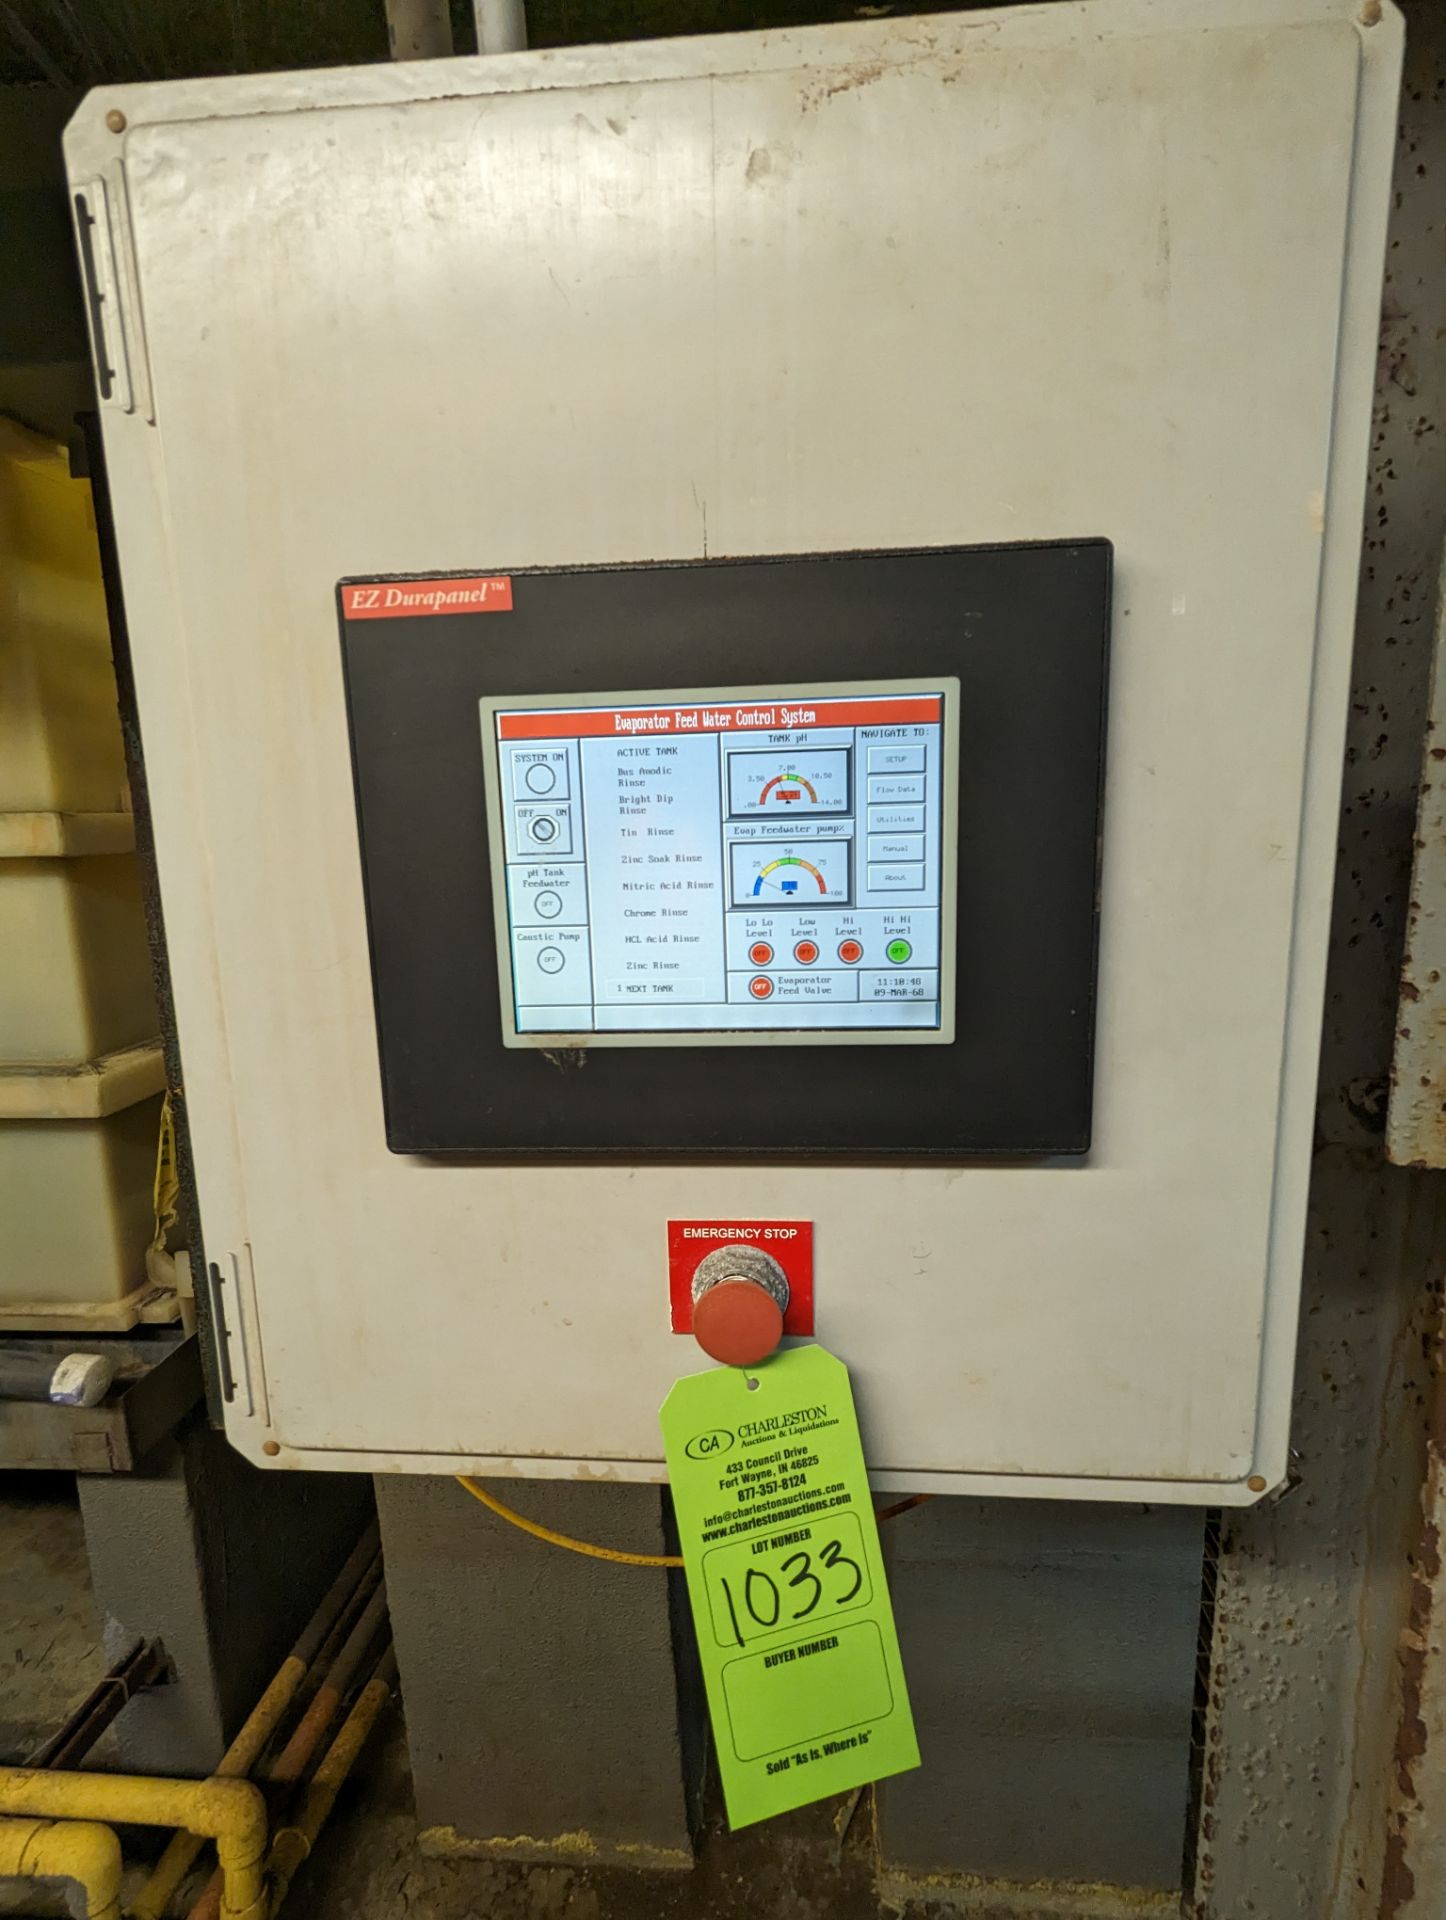 EVAPORATOR FEED WATER CONTROL SYSTEM WITH DIRECT LOGIC 305 PLC EZ DURAPANEL